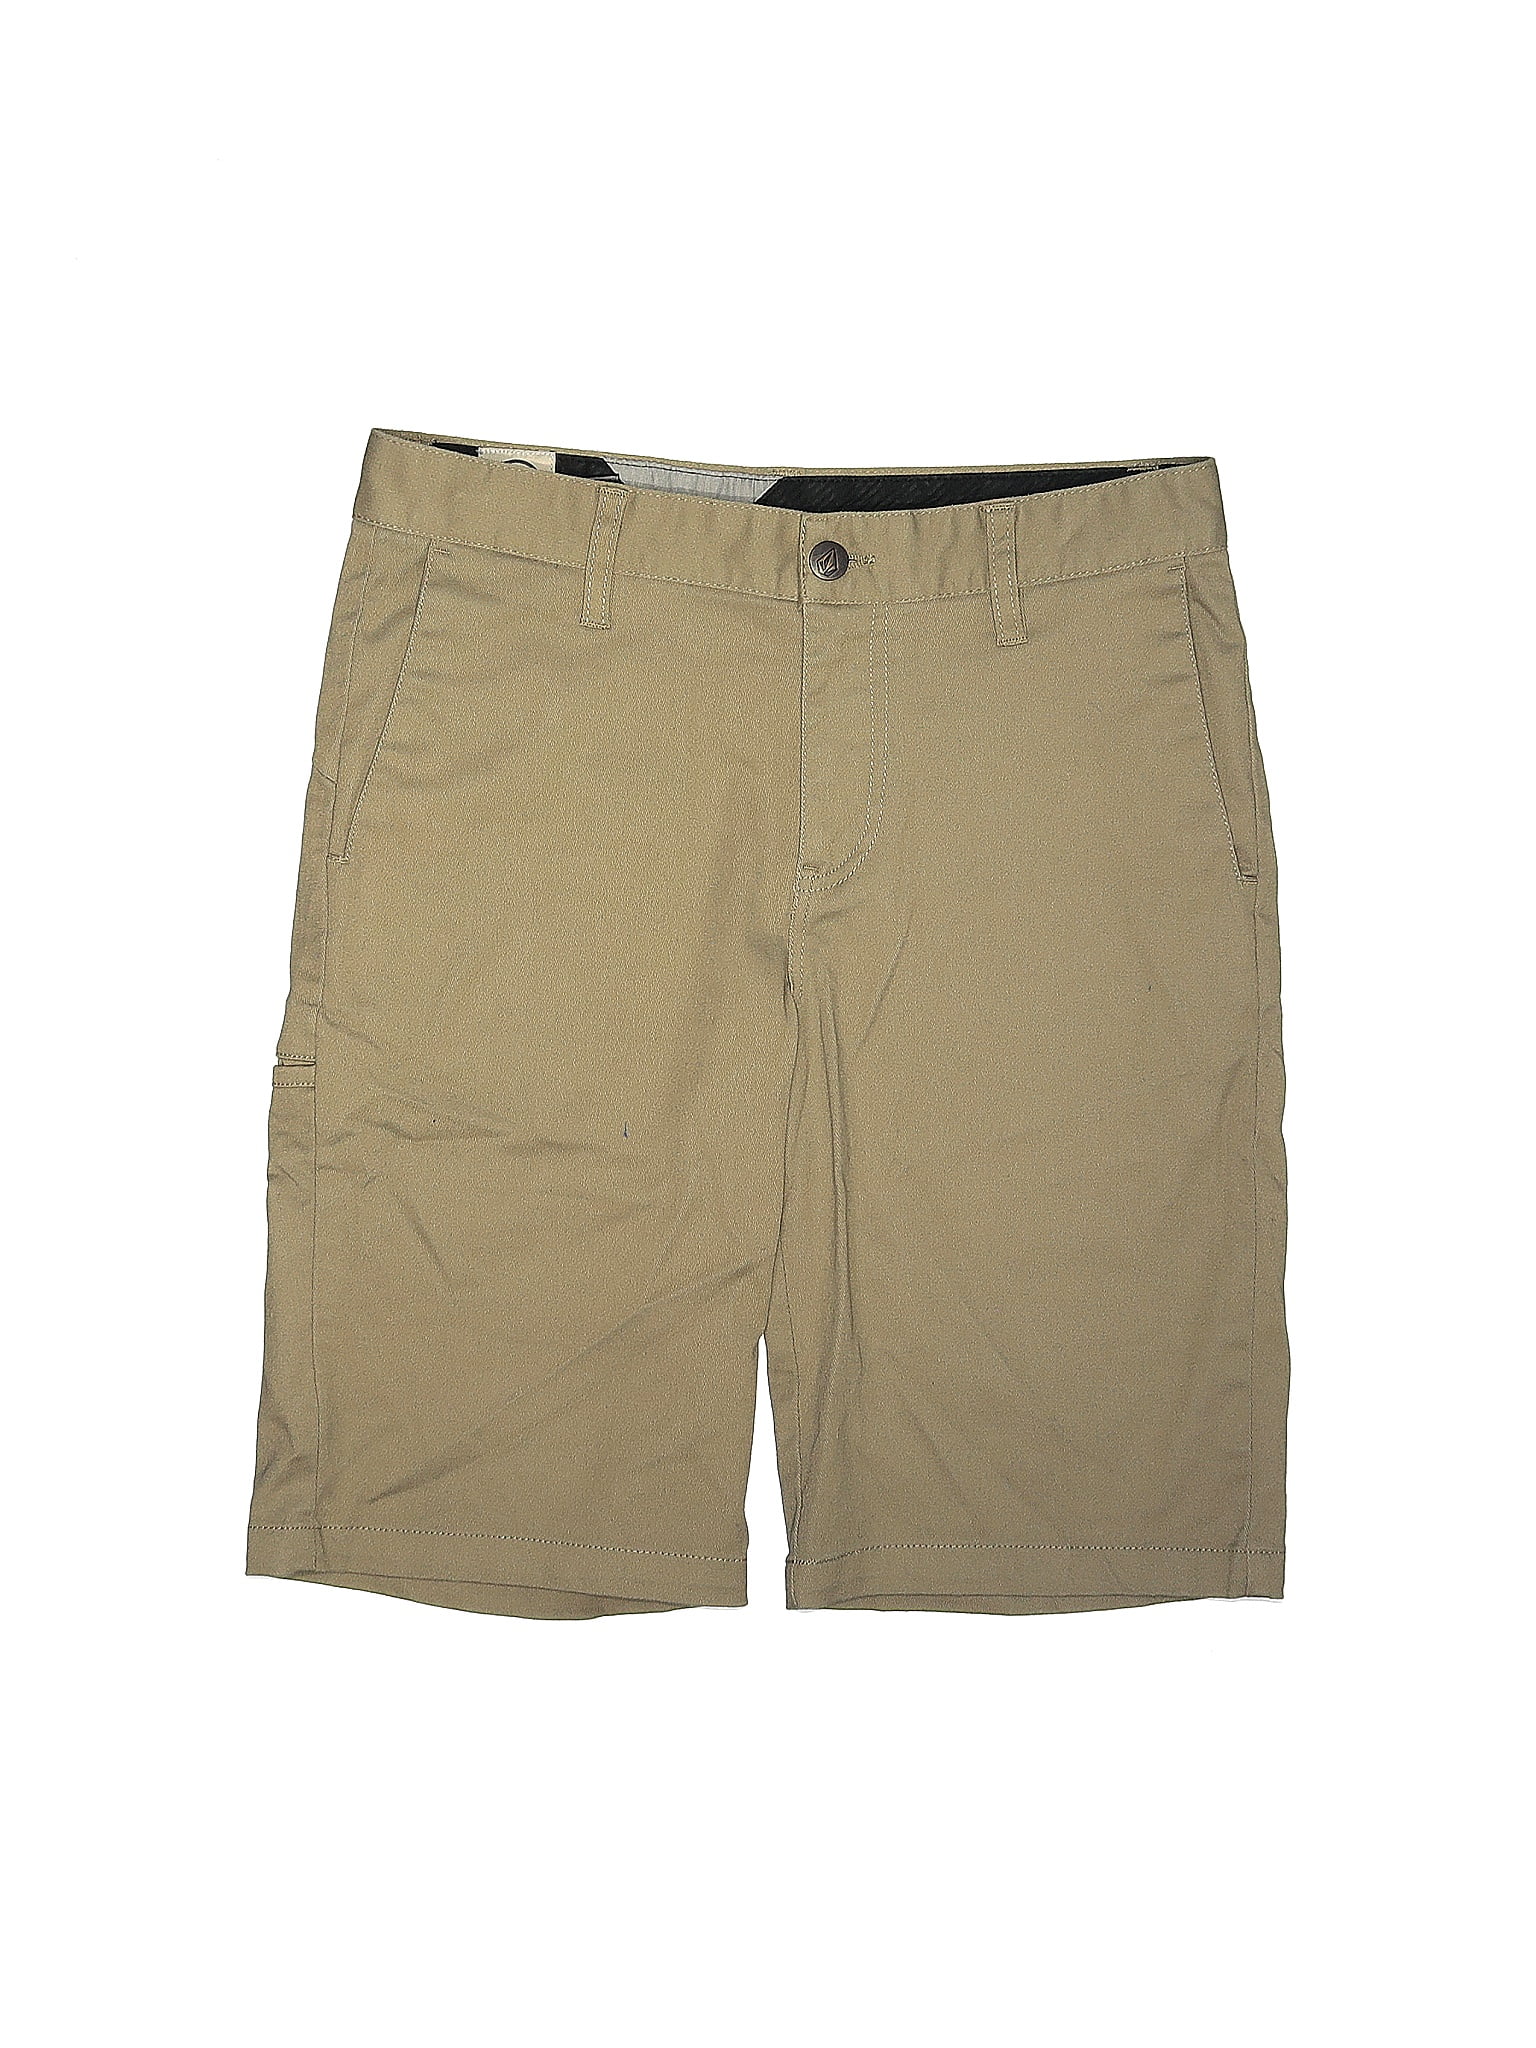 Details about   Boy's Big Youth Volcom Camo Shorts 